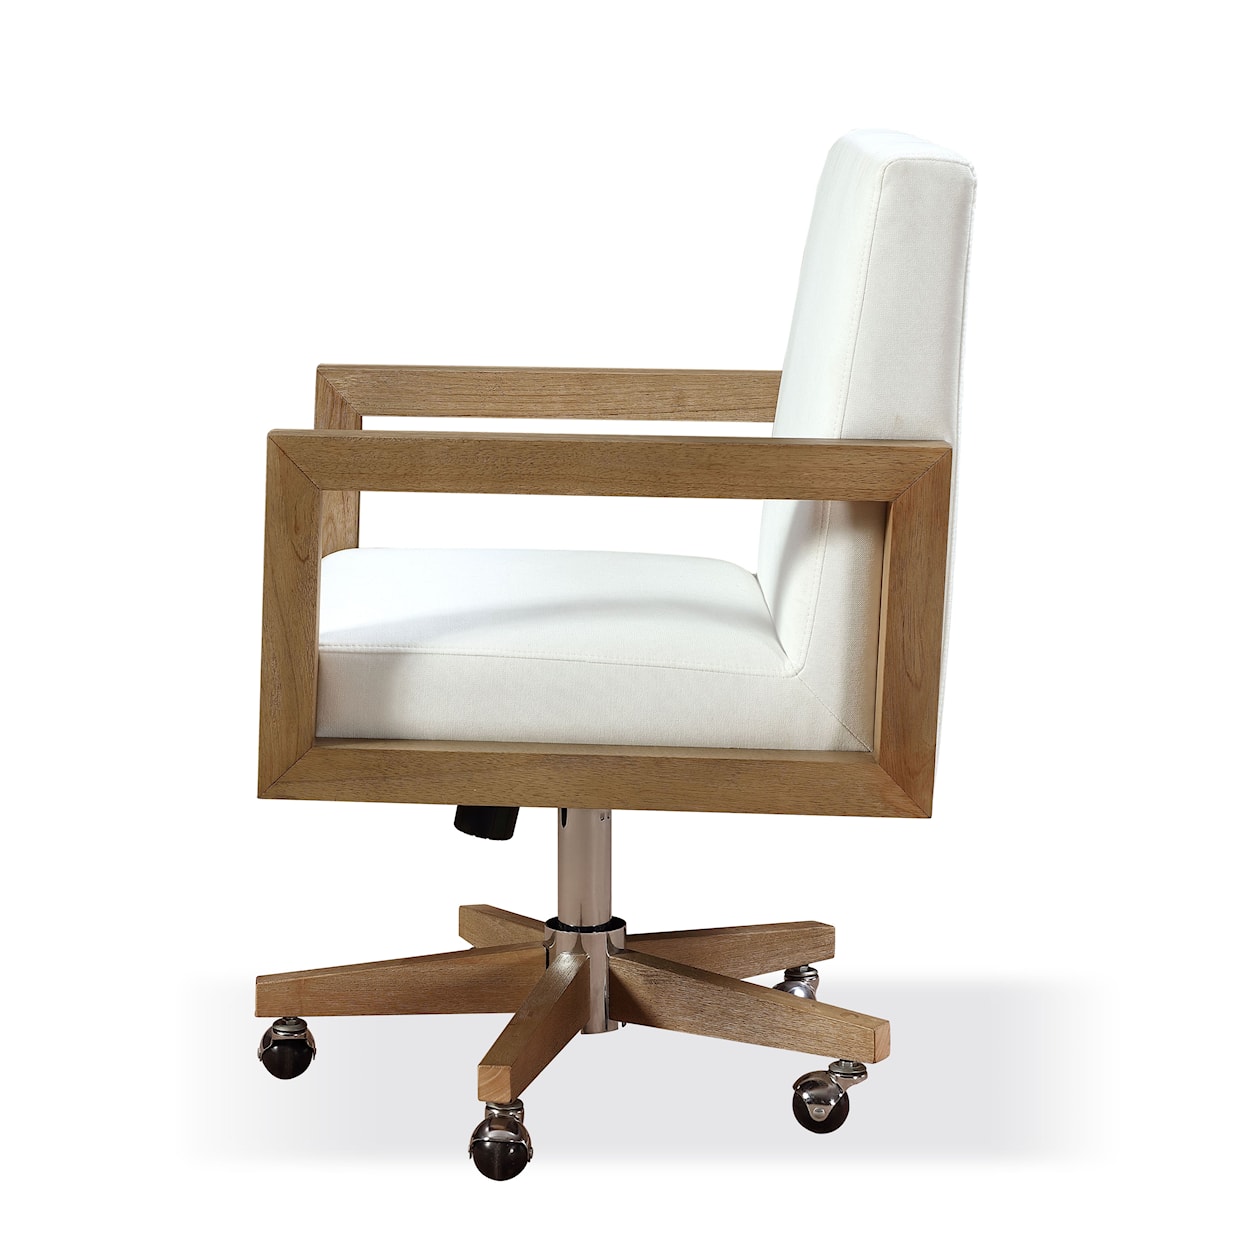 Modus International One Office Chair - Bisque/Pearl